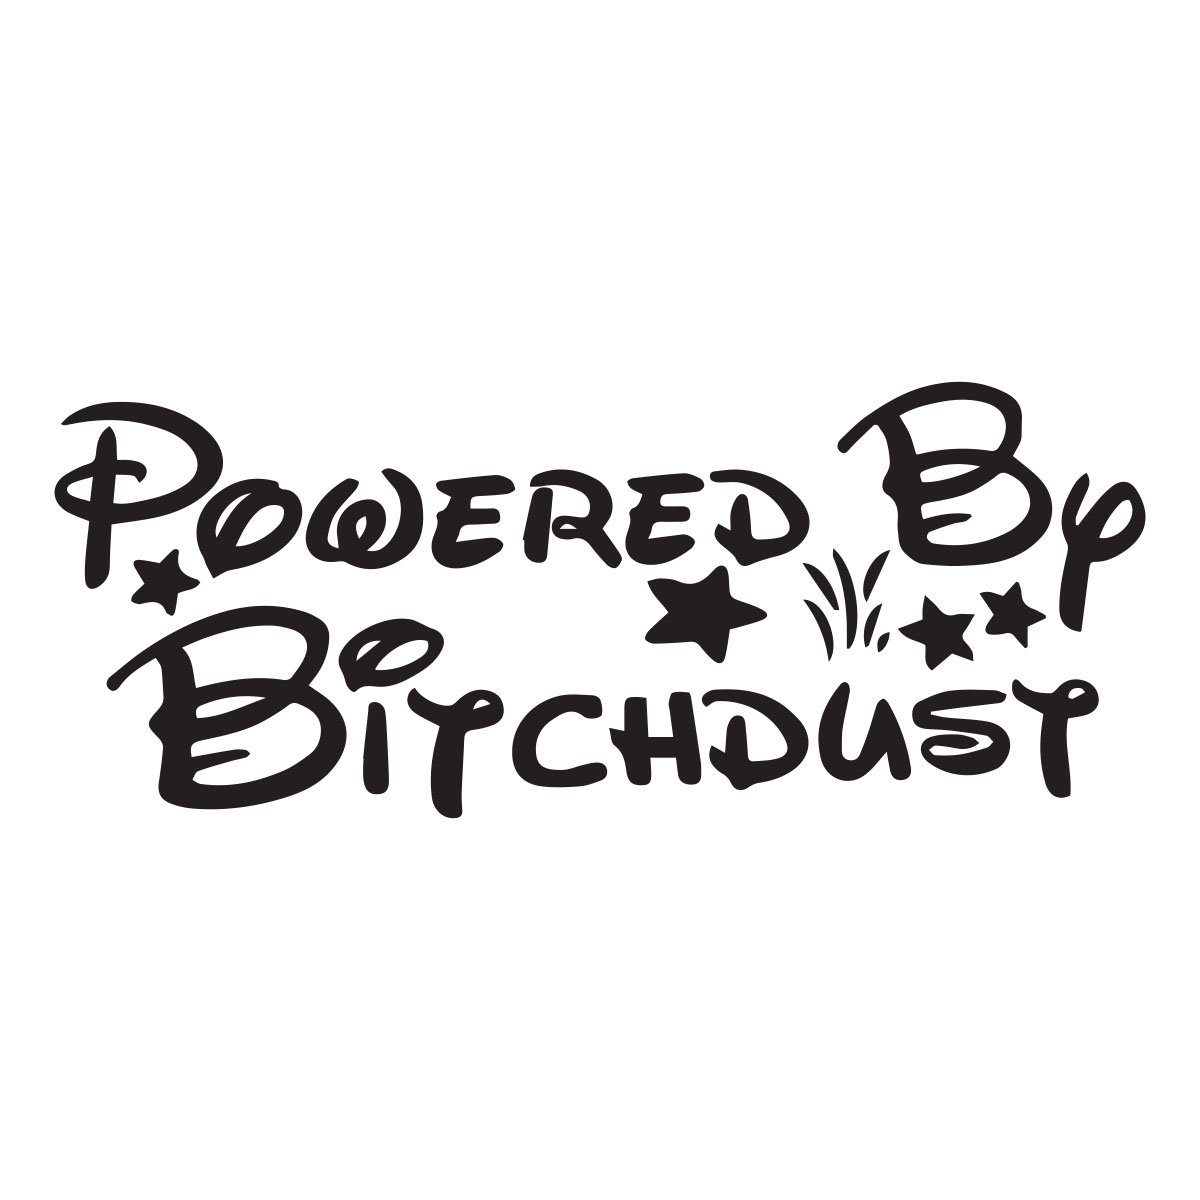 powered by bitchdust